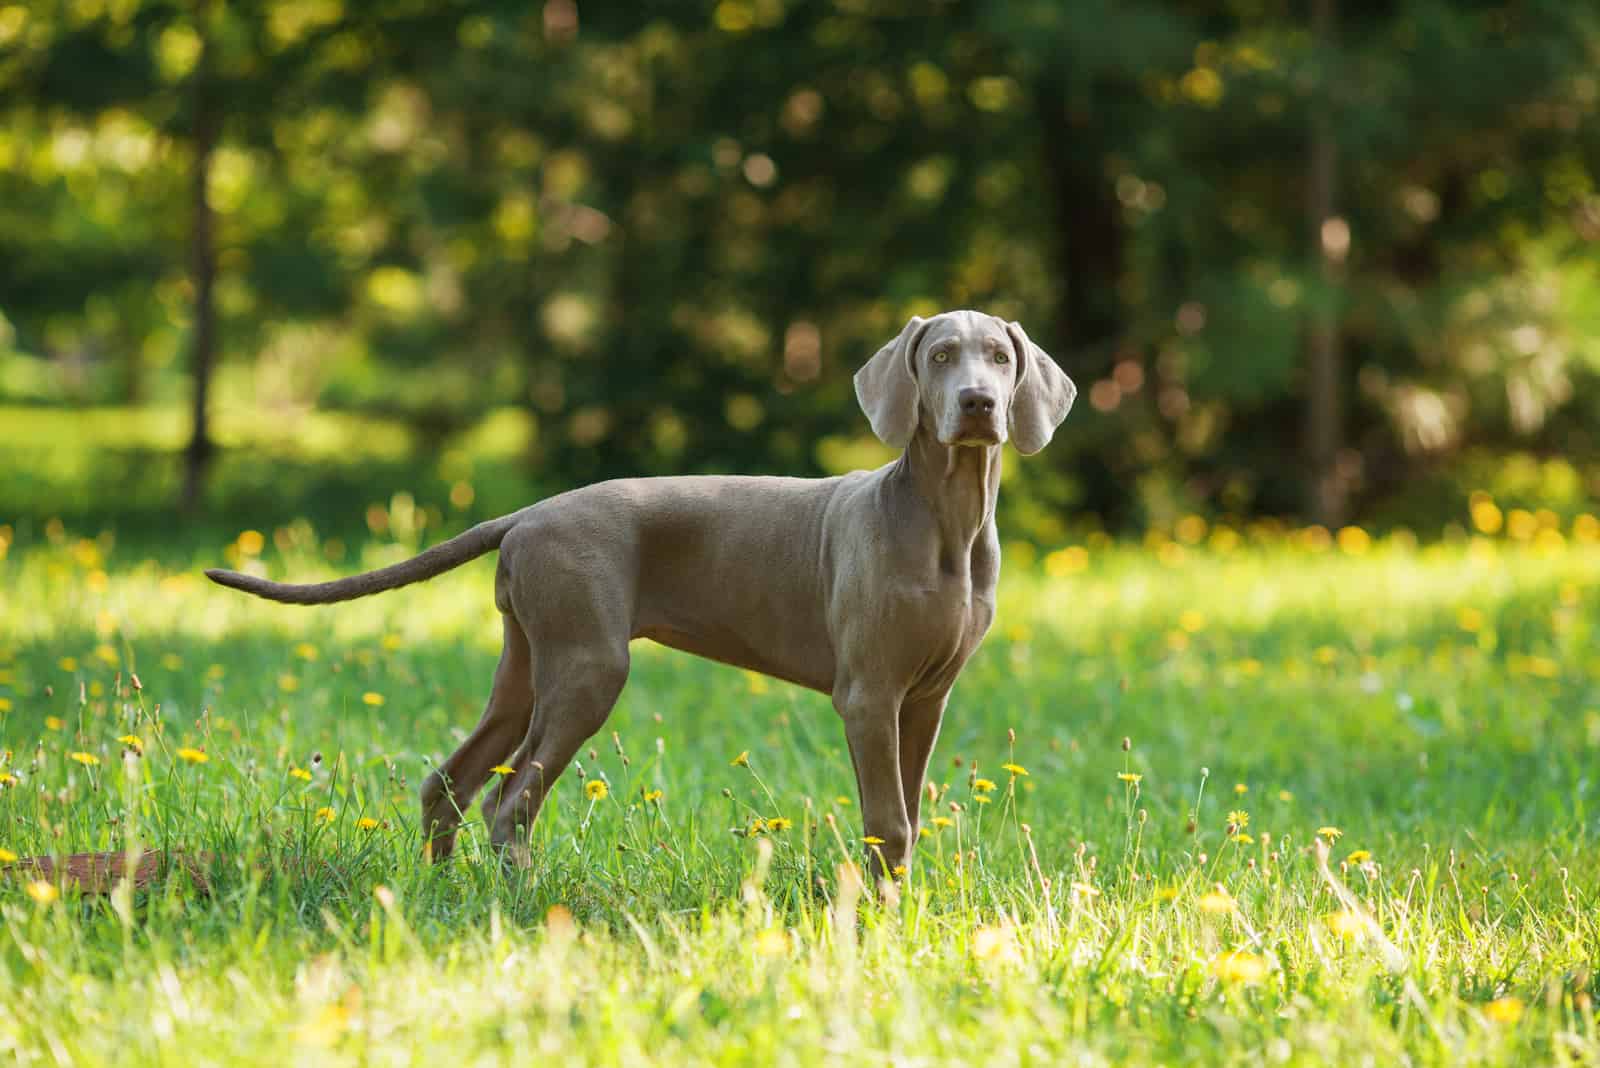 young puppy dog of weimaraner breed with gray coat